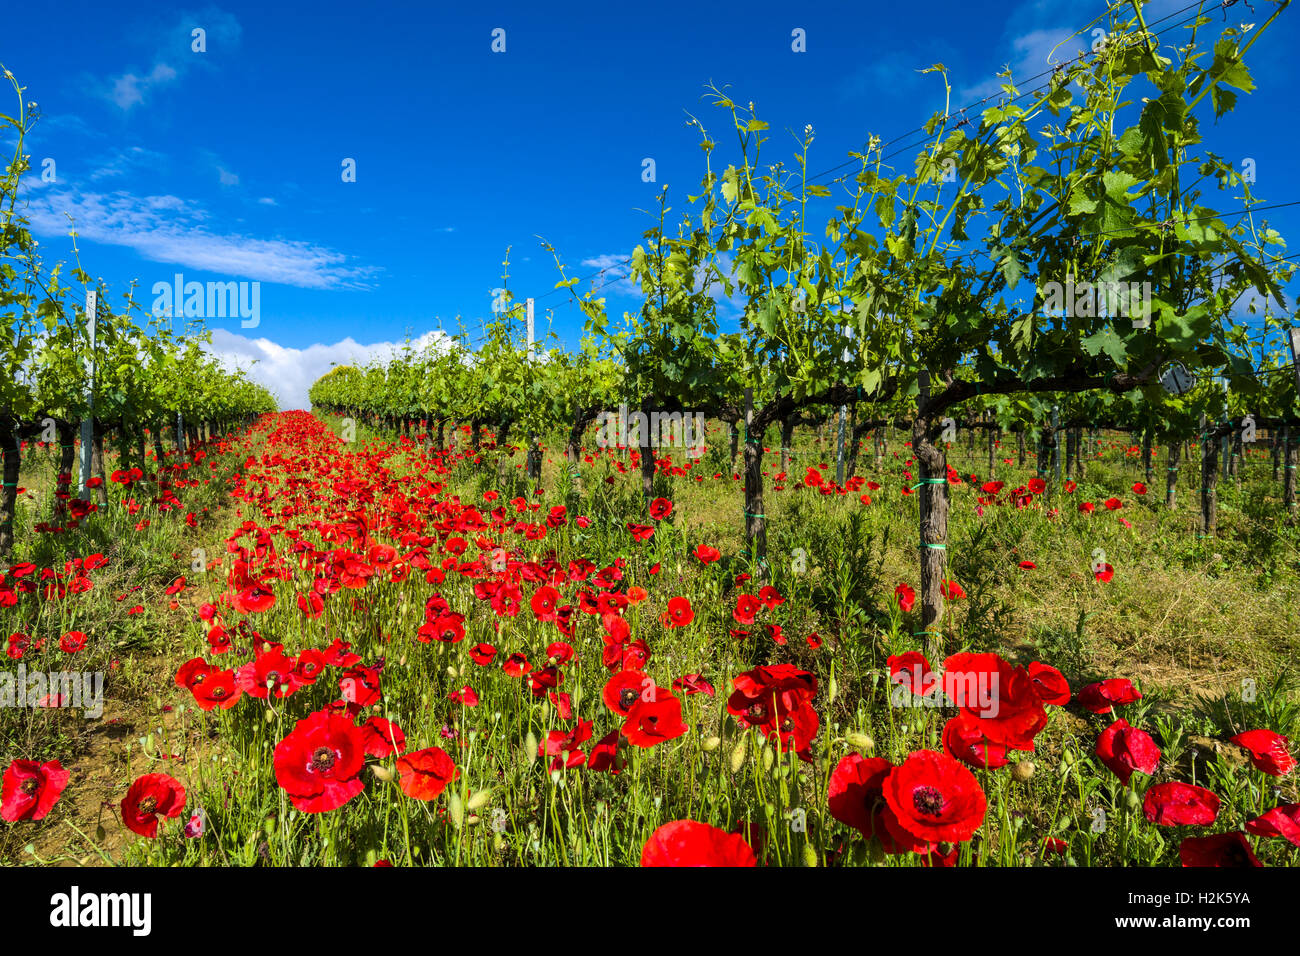 Typical green Tuscan landscape in Val d’Orcia with wineyards, poppies and a blue cloudy sky, Ascianello, Tuscany, Italy Stock Photo